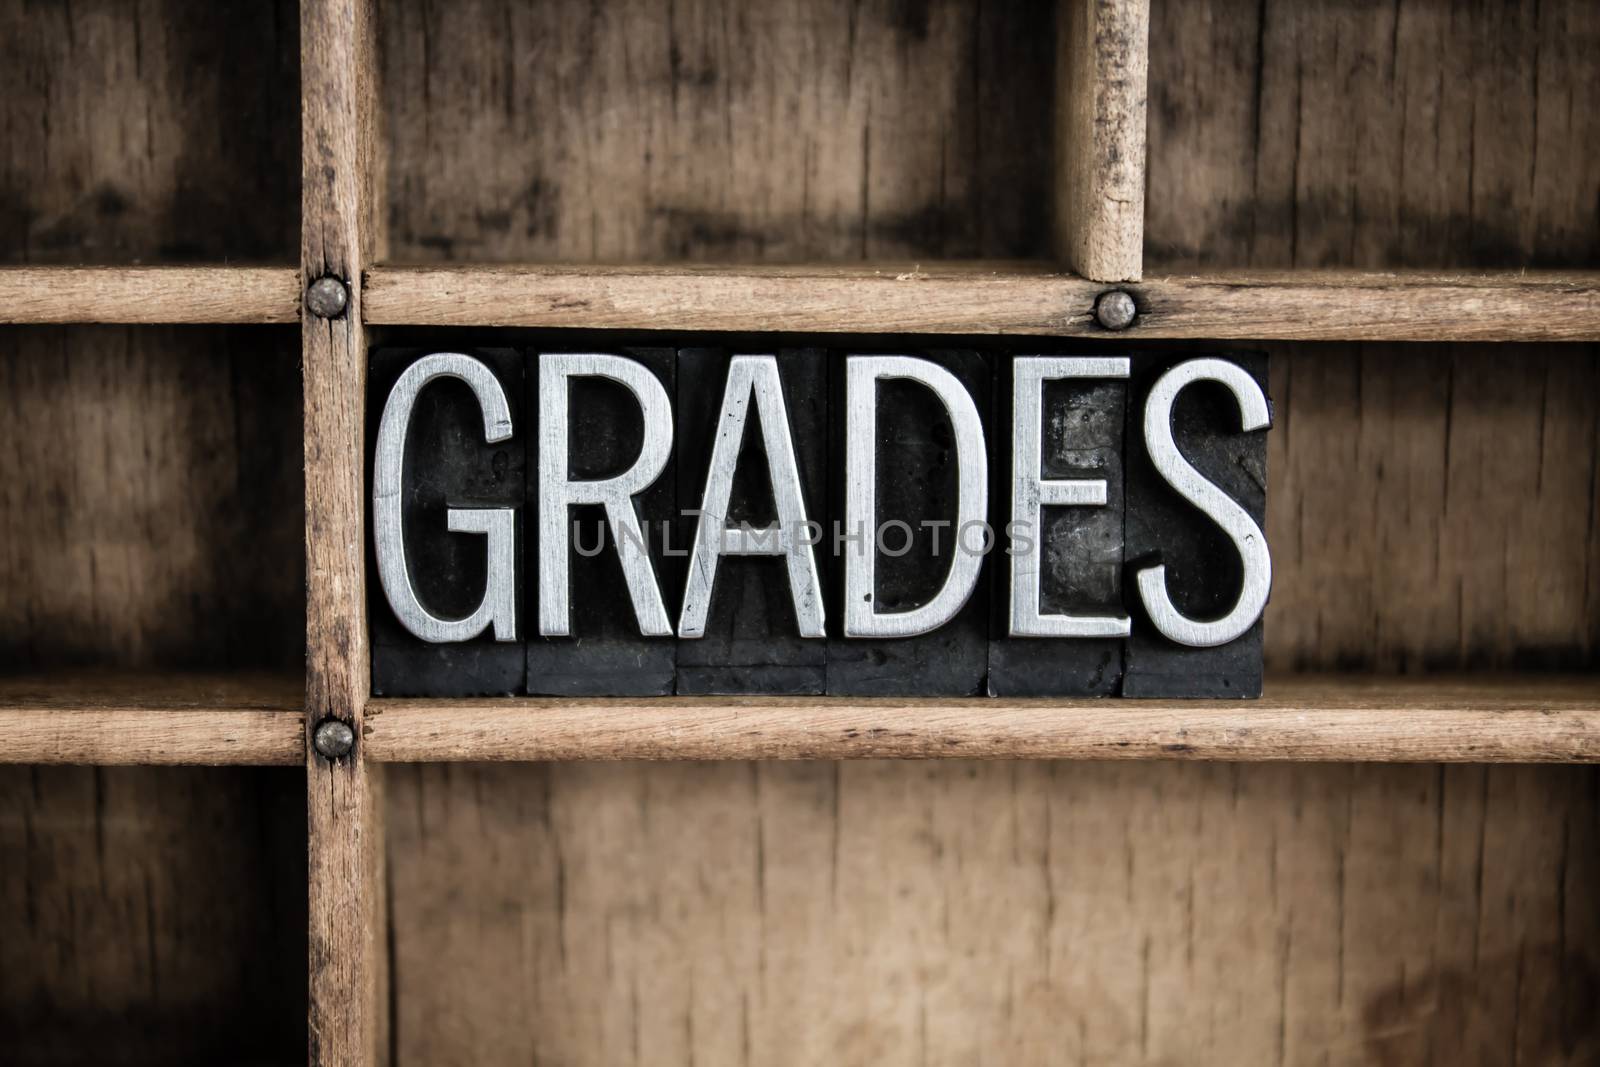 The word "GRADES" written in vintage metal letterpress type in a wooden drawer with dividers.